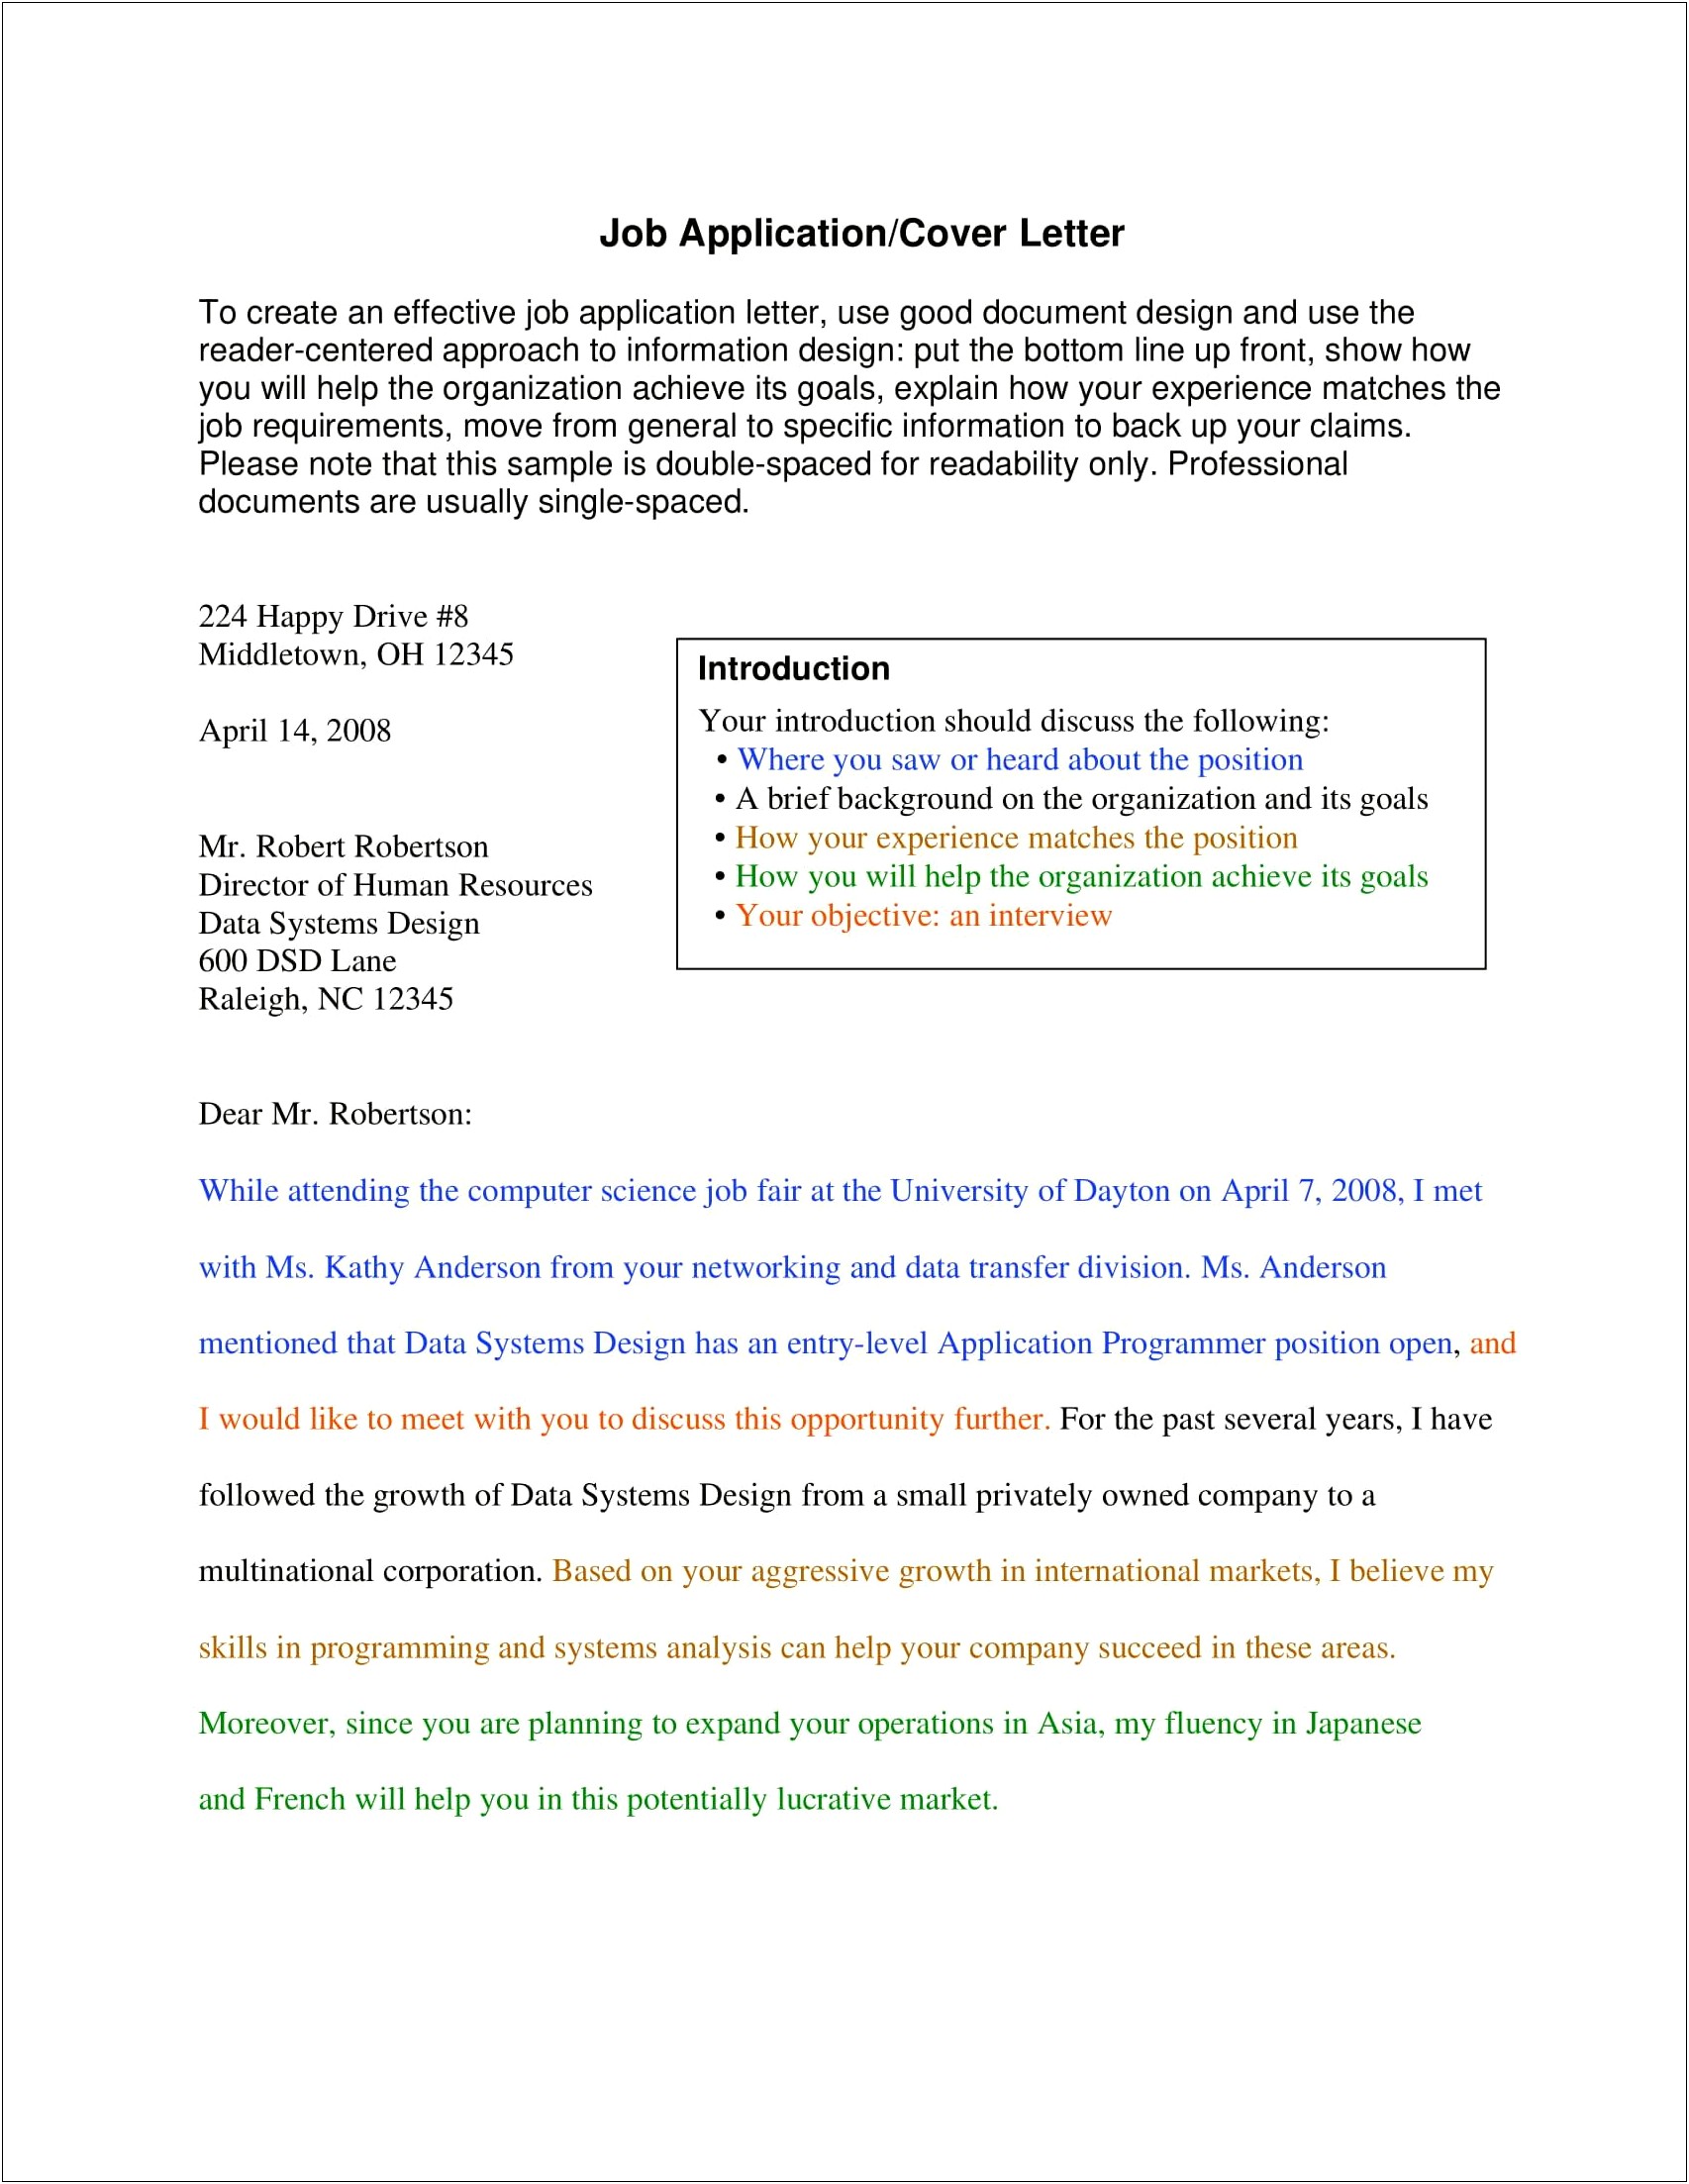 Resume Cover Letter Example Purdue Owl